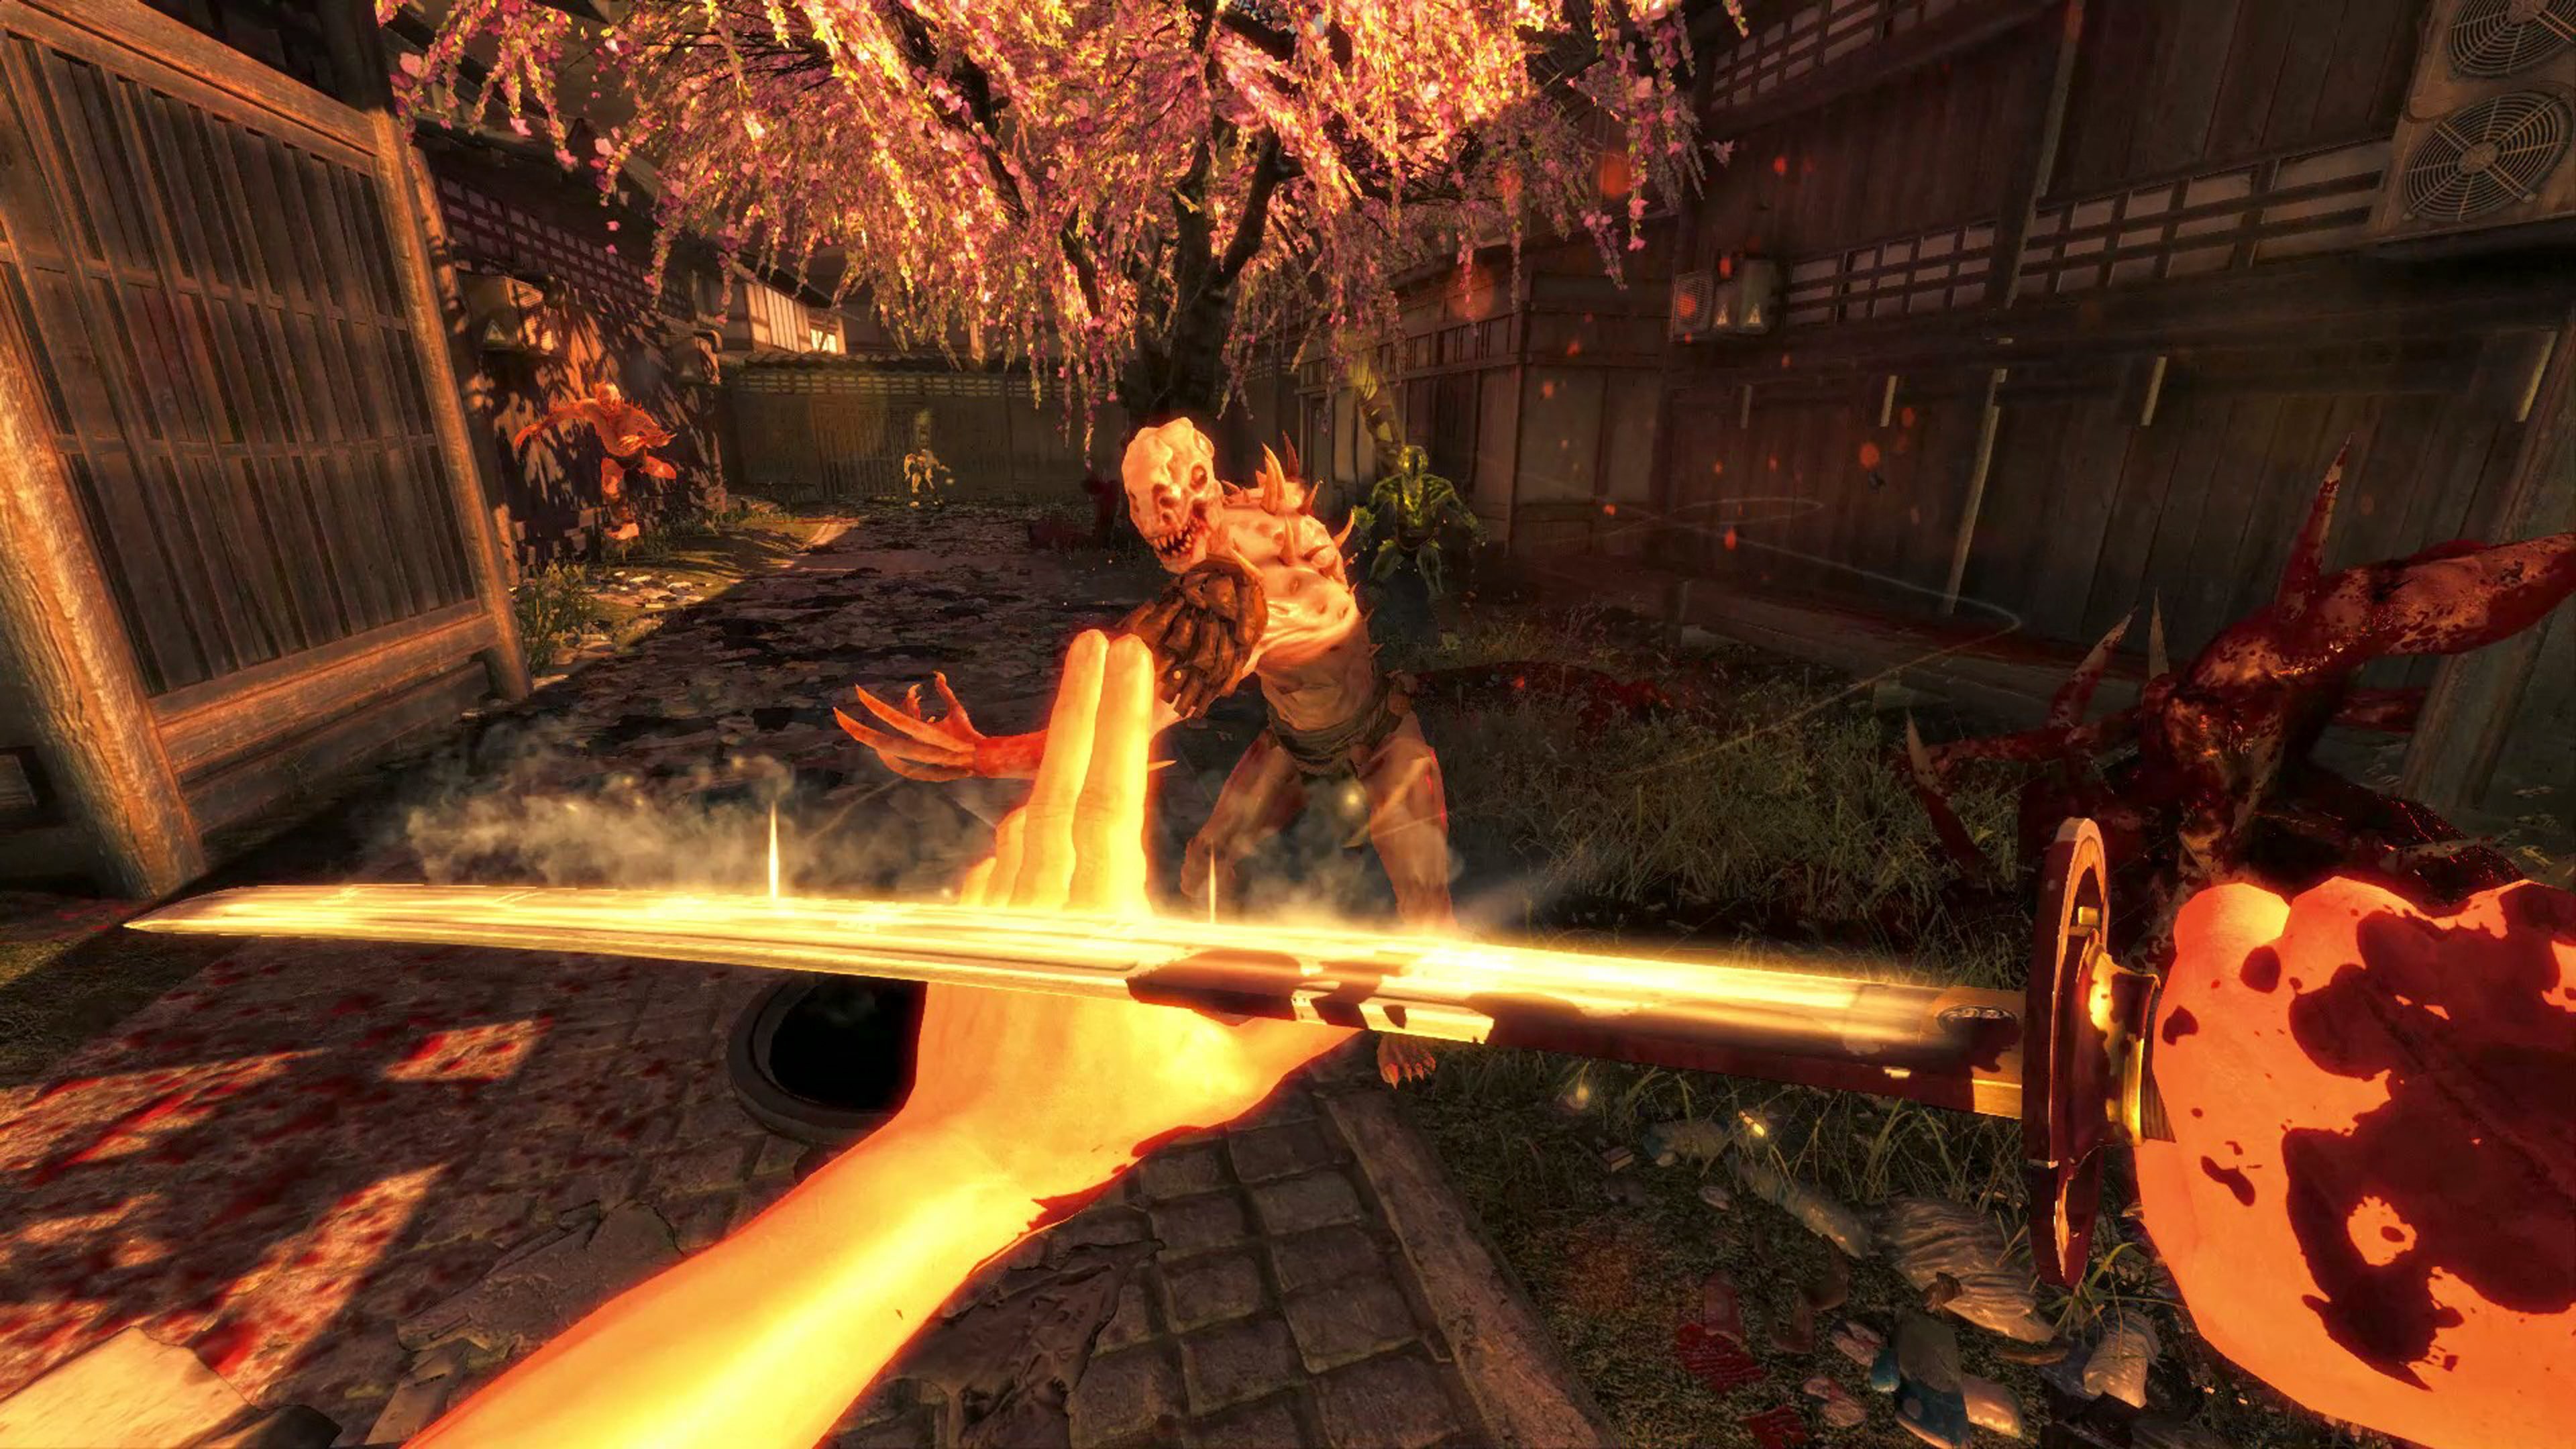 Shadow Warrior 3: Definitive Edition  PS4 & PS5 on PS5 PS4 — price  history, screenshots, discounts • USA